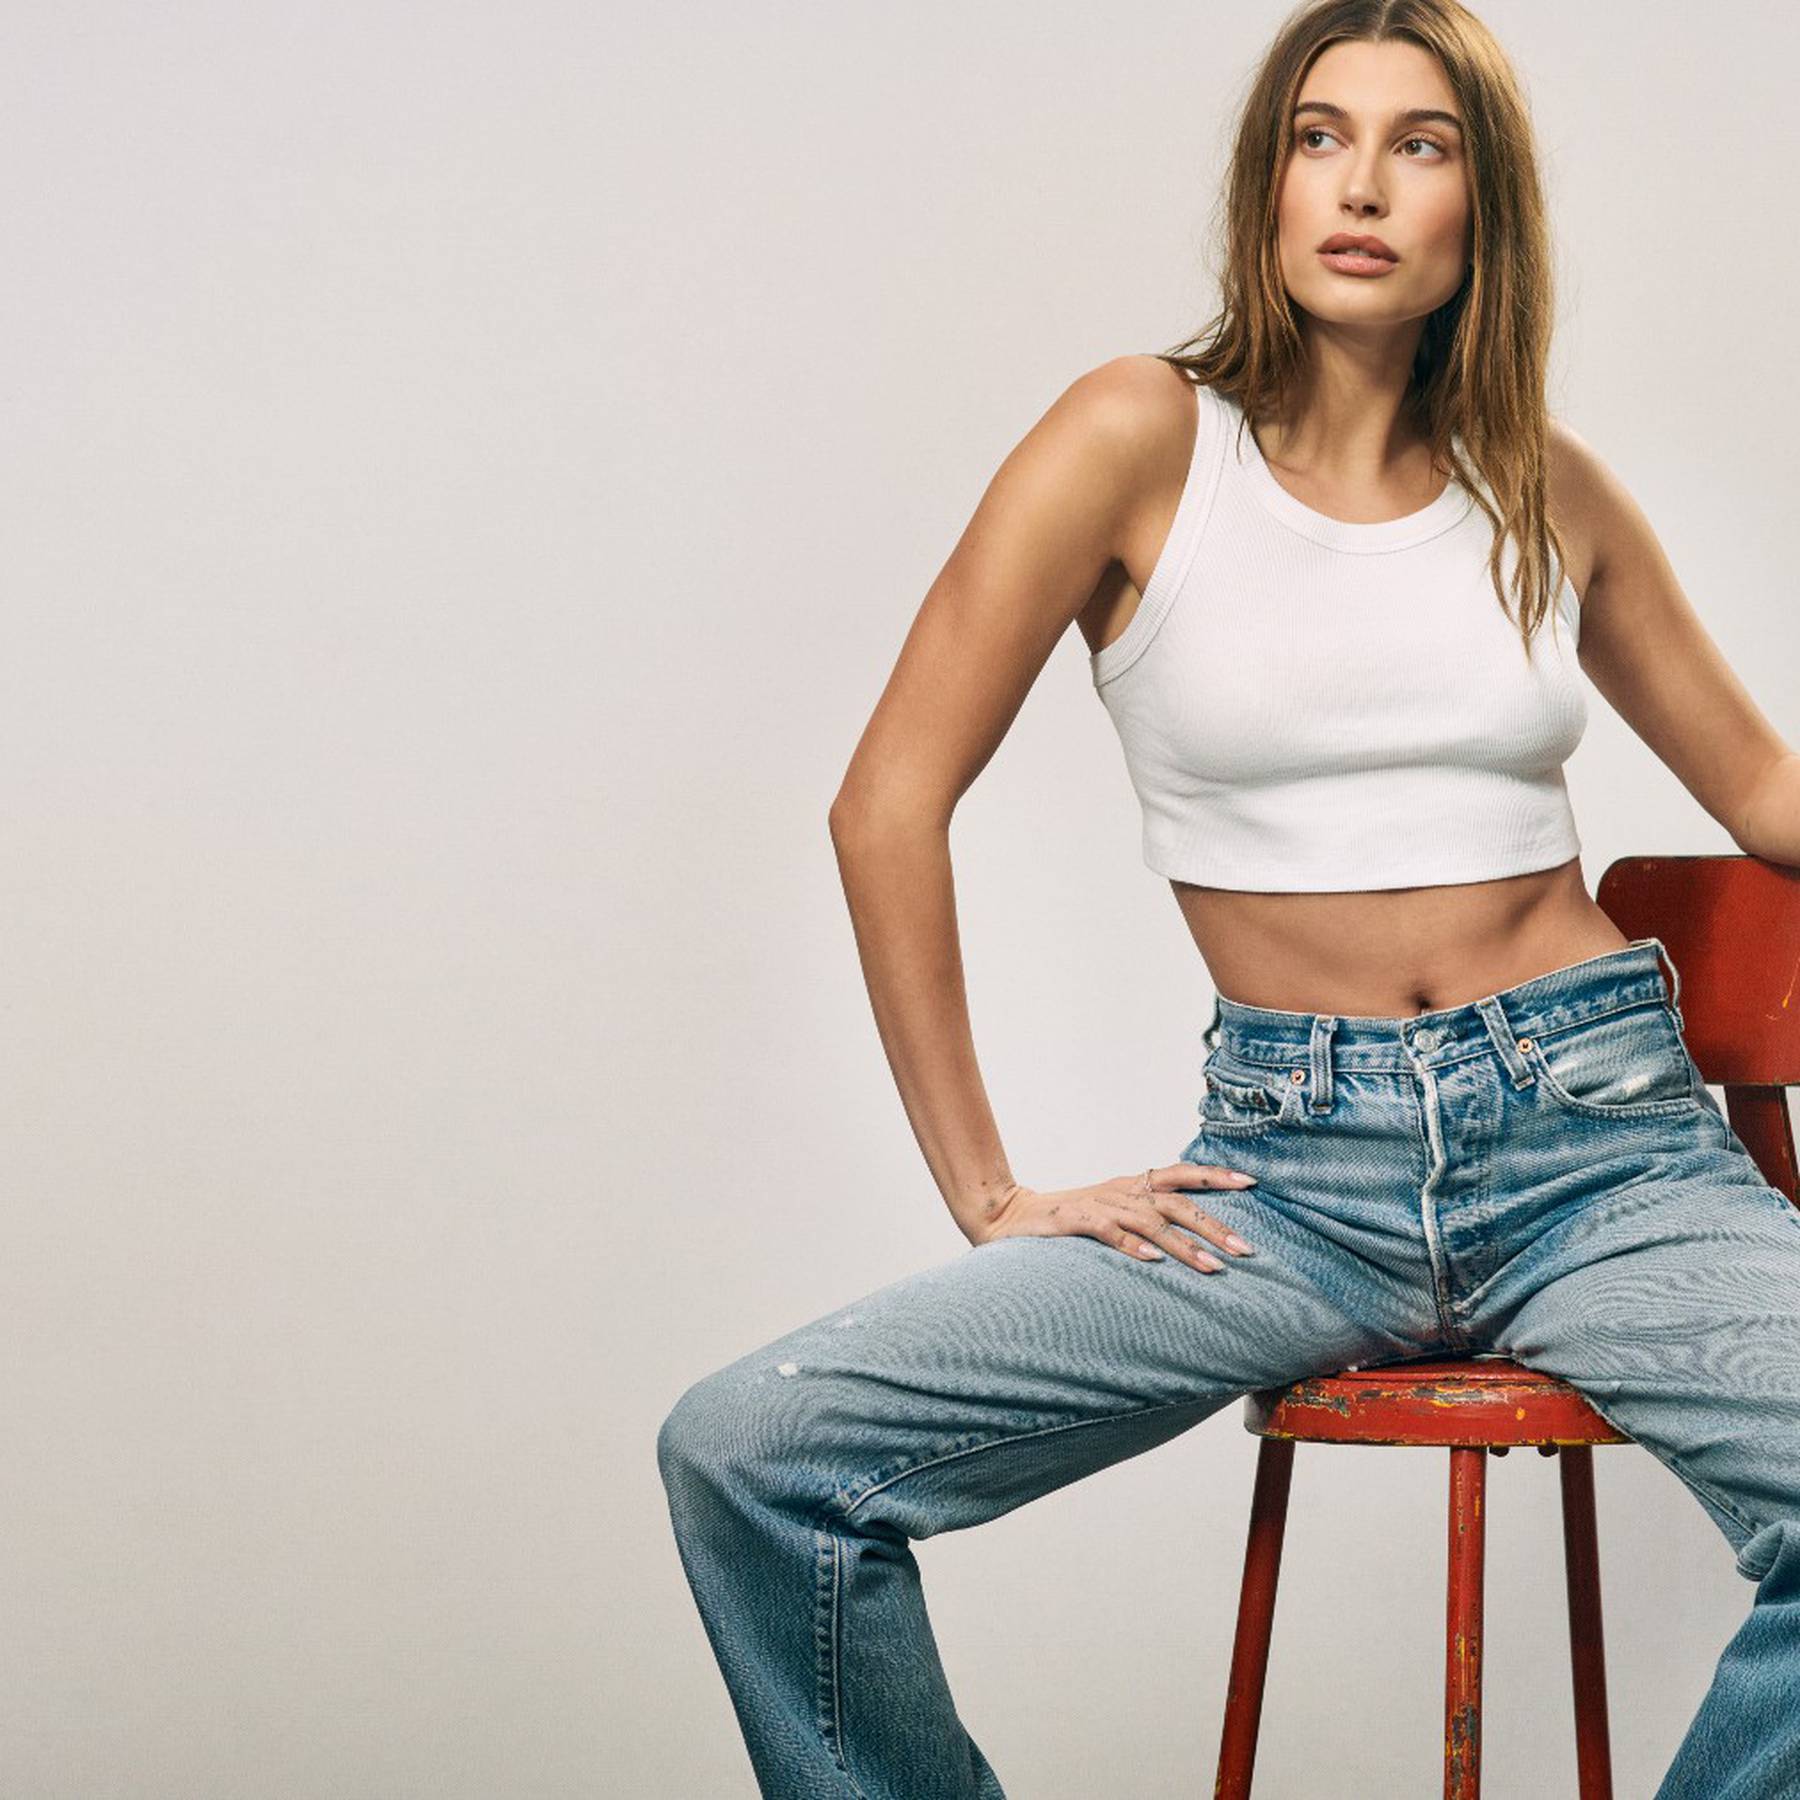 Levi's And Other Denim Companies To Go Into 'Athleisure' - DoYou